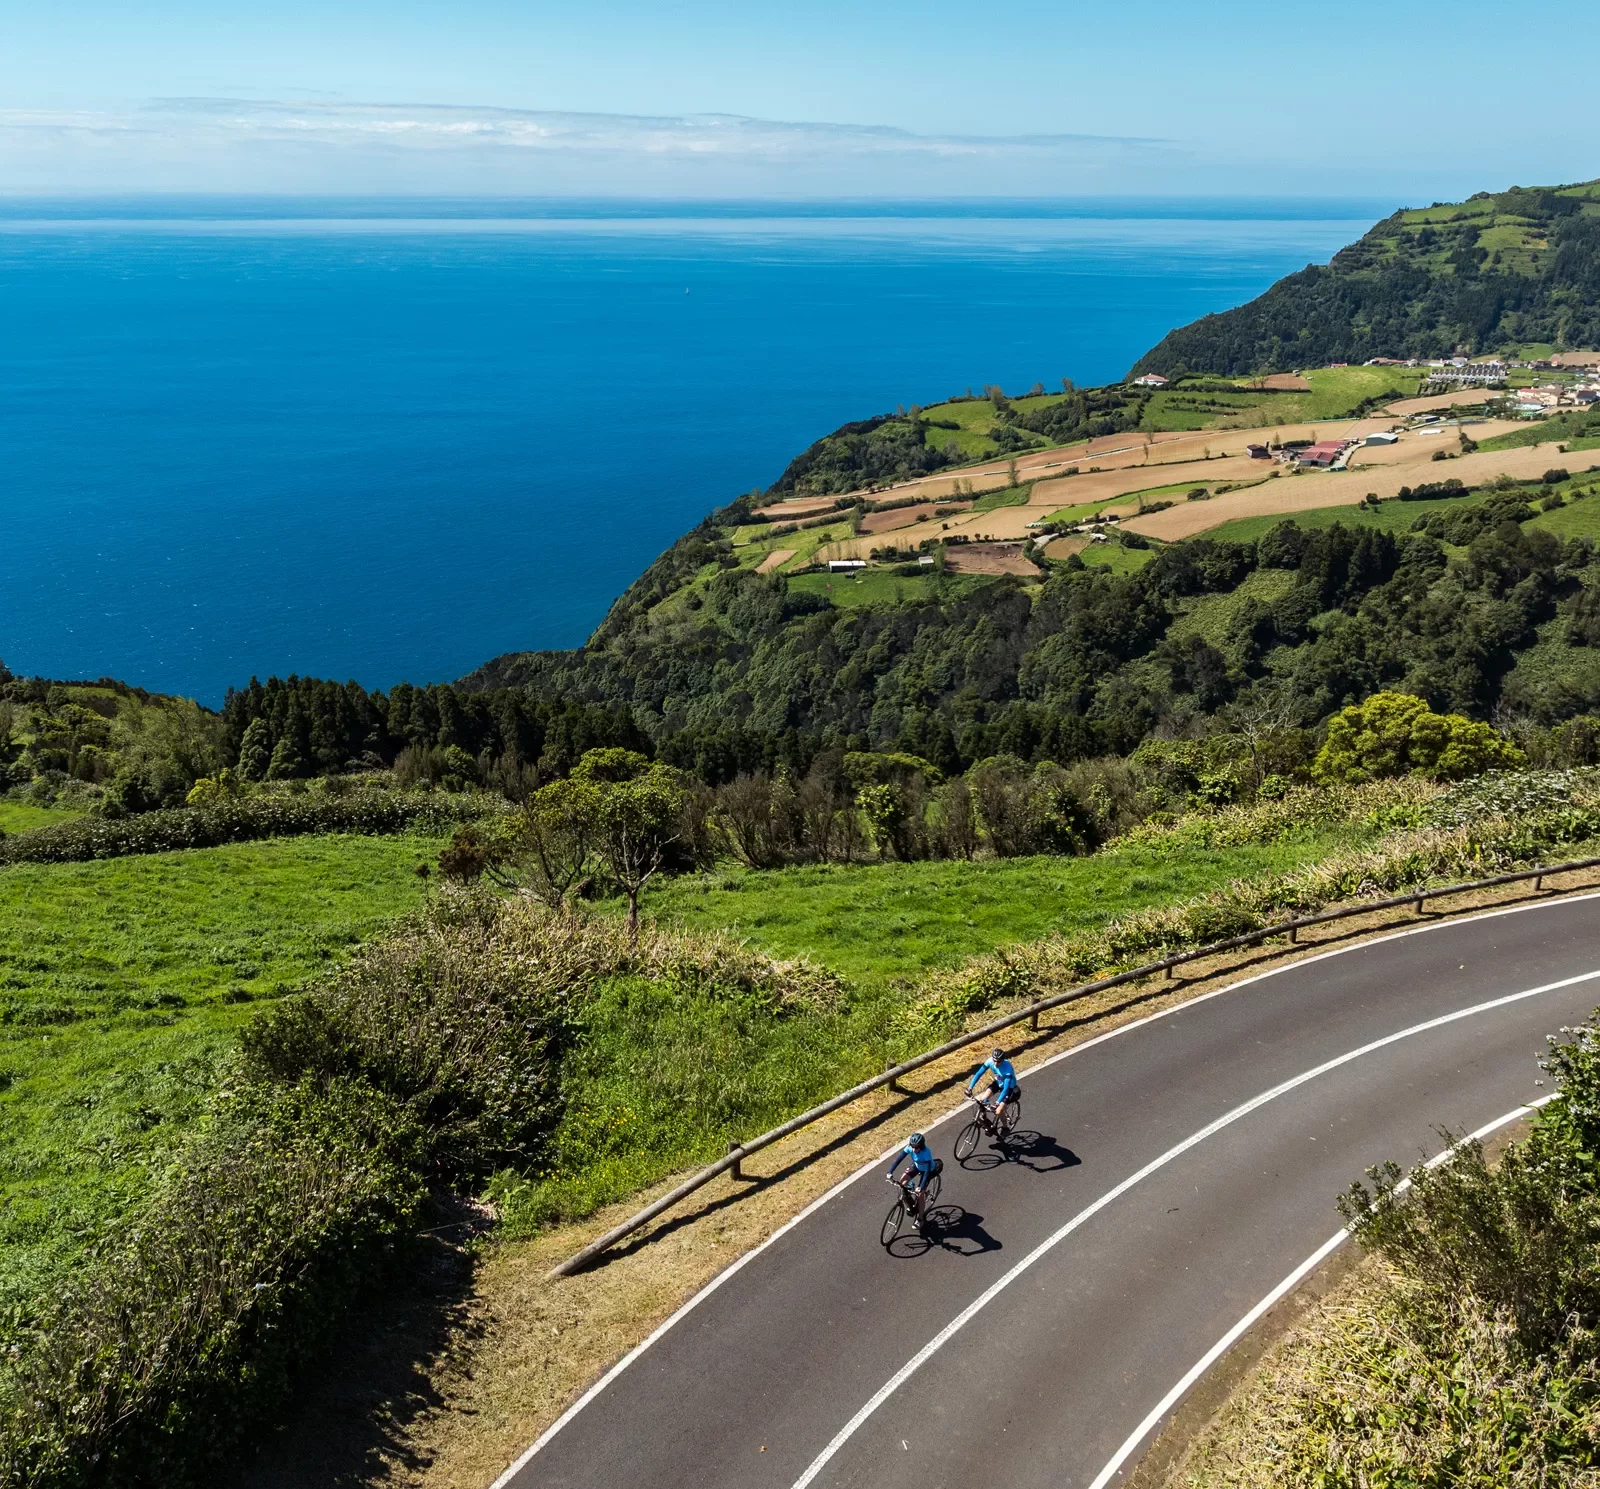 Two people riding their bikes on an asphalt road with a large valley and ocean in the background